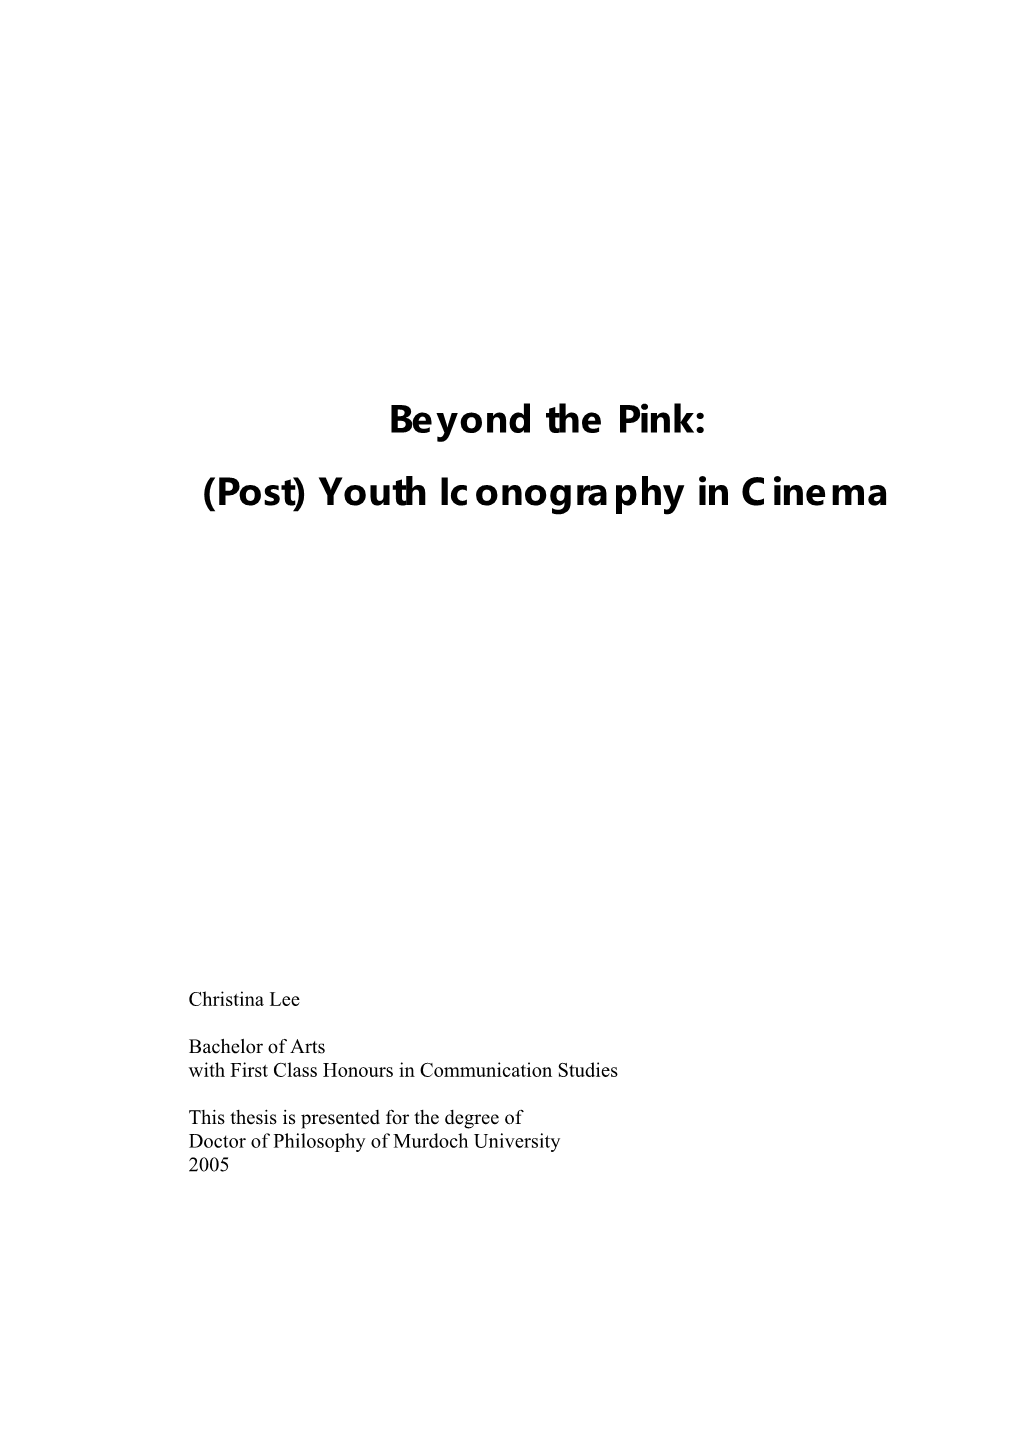 Beyond the Pink: (Post) Youth Iconography in Cinema